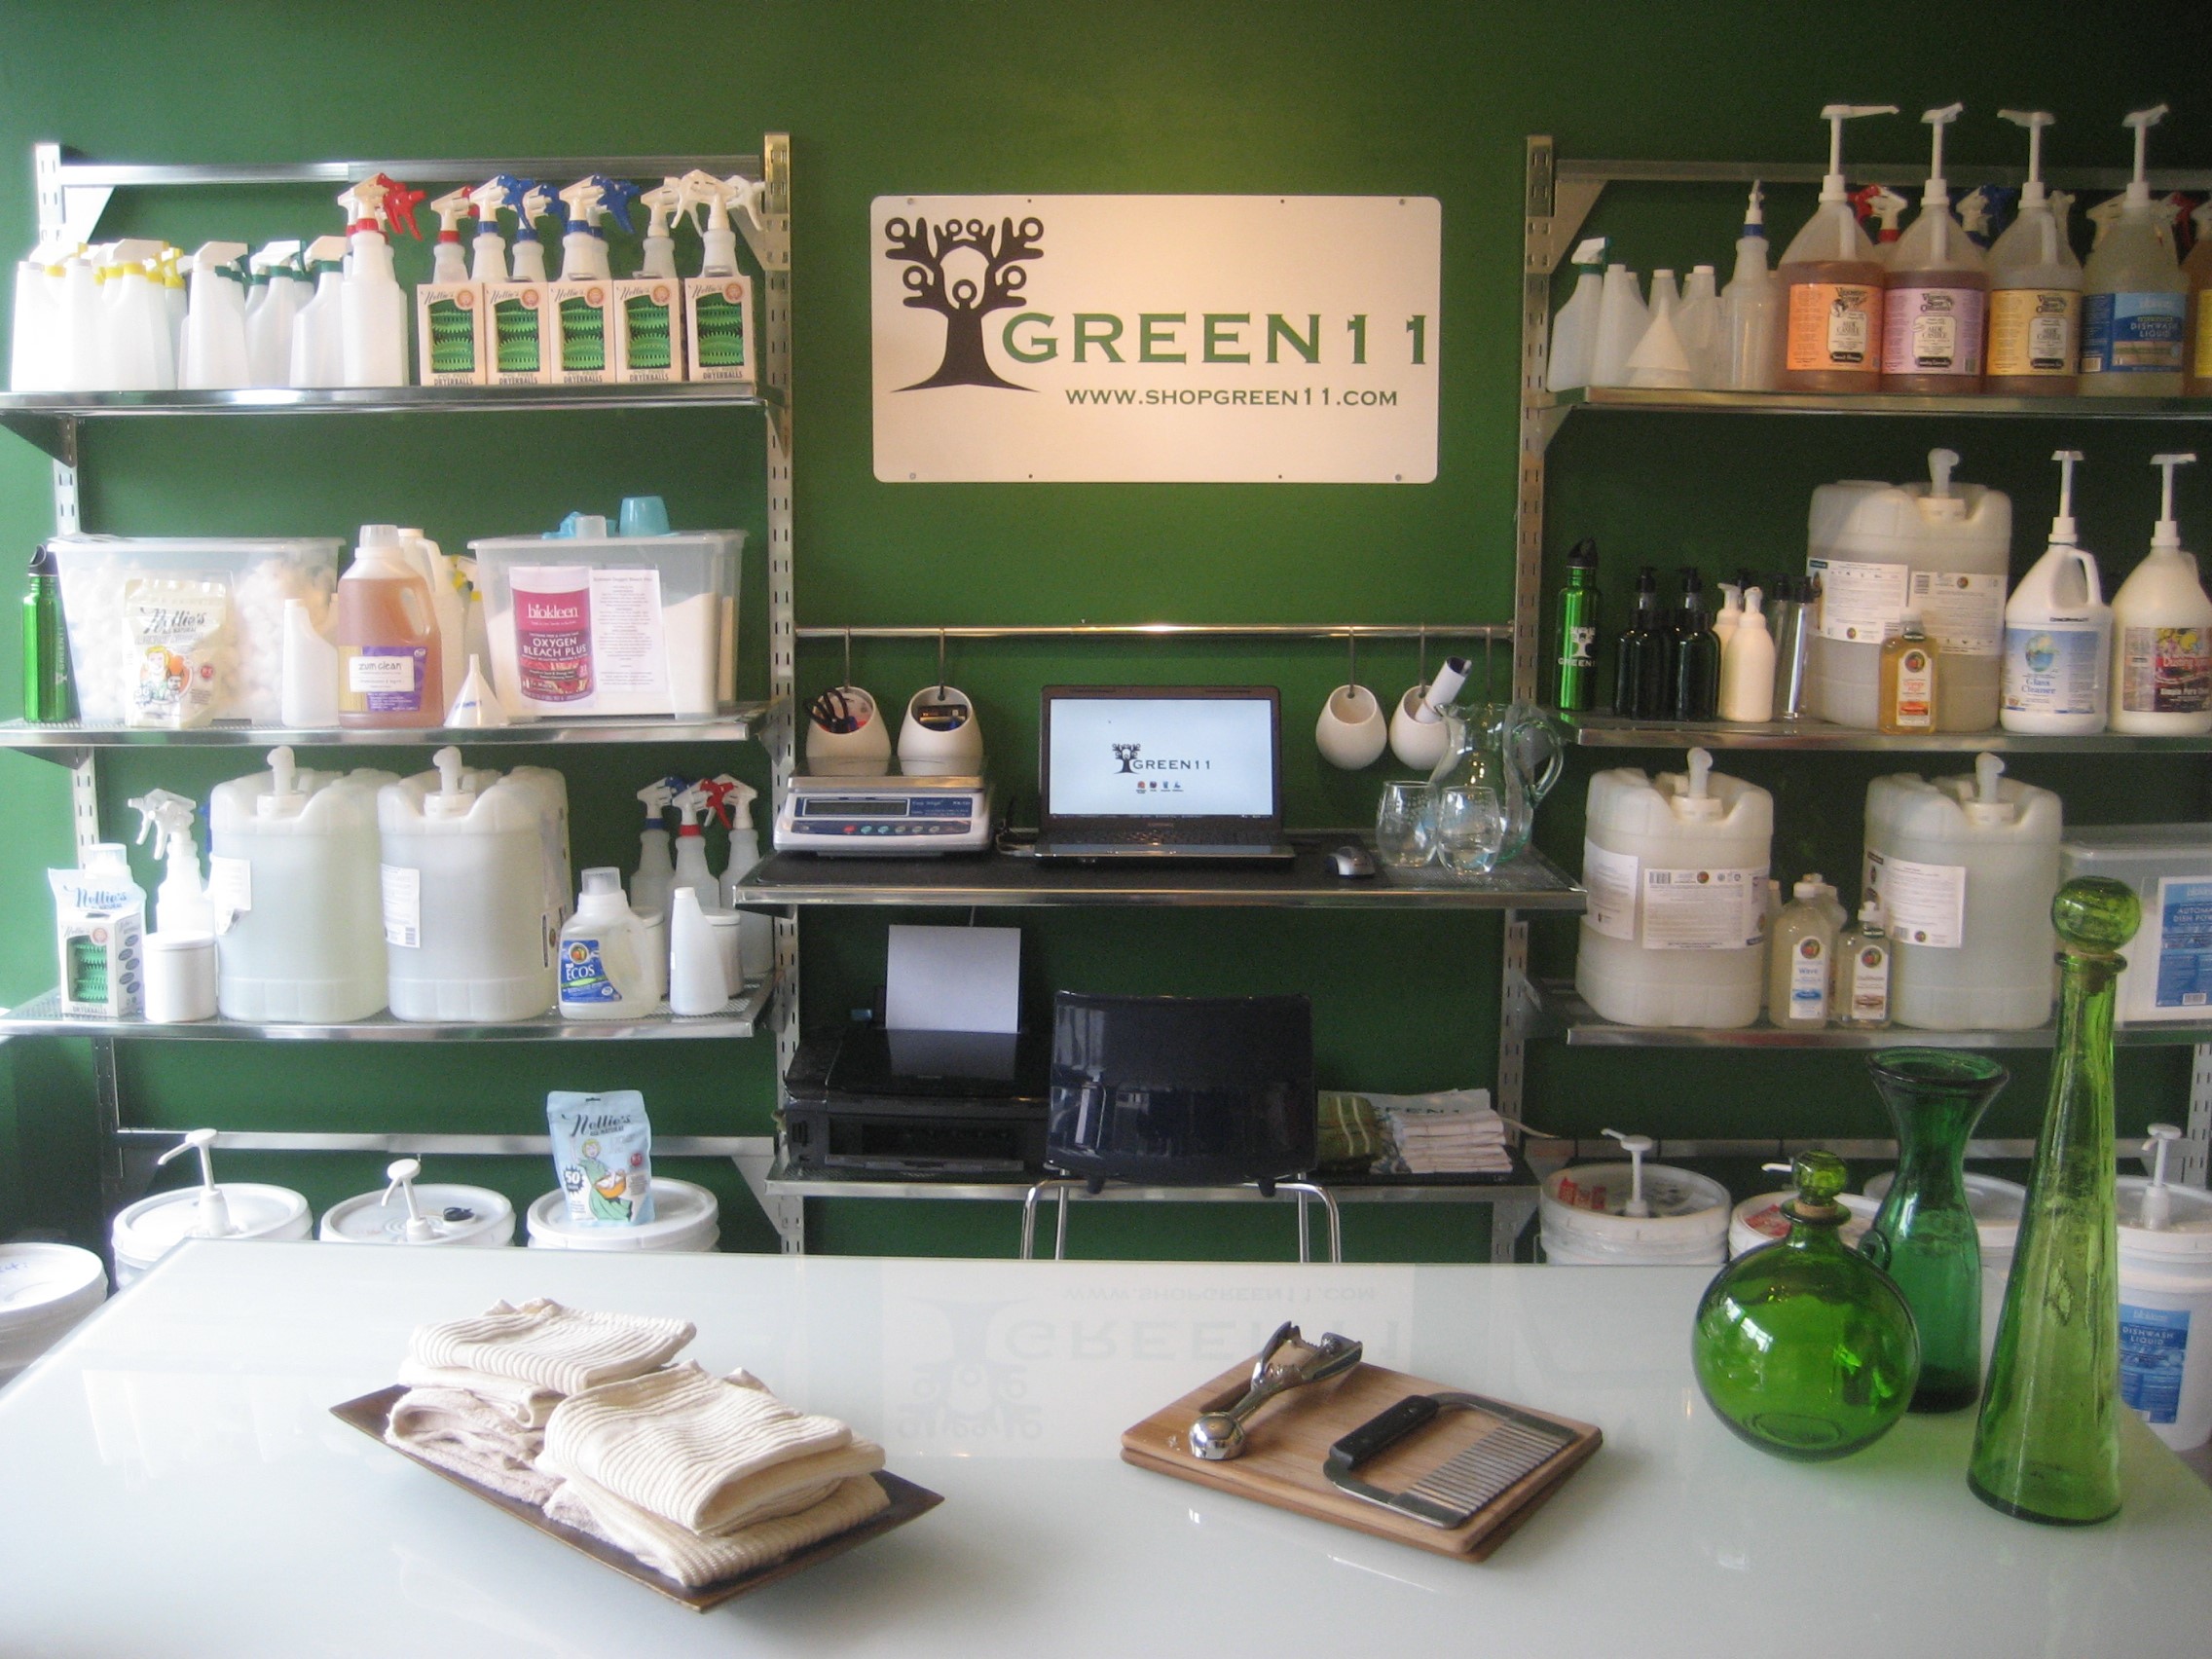 The sales counter of the Green11 store.